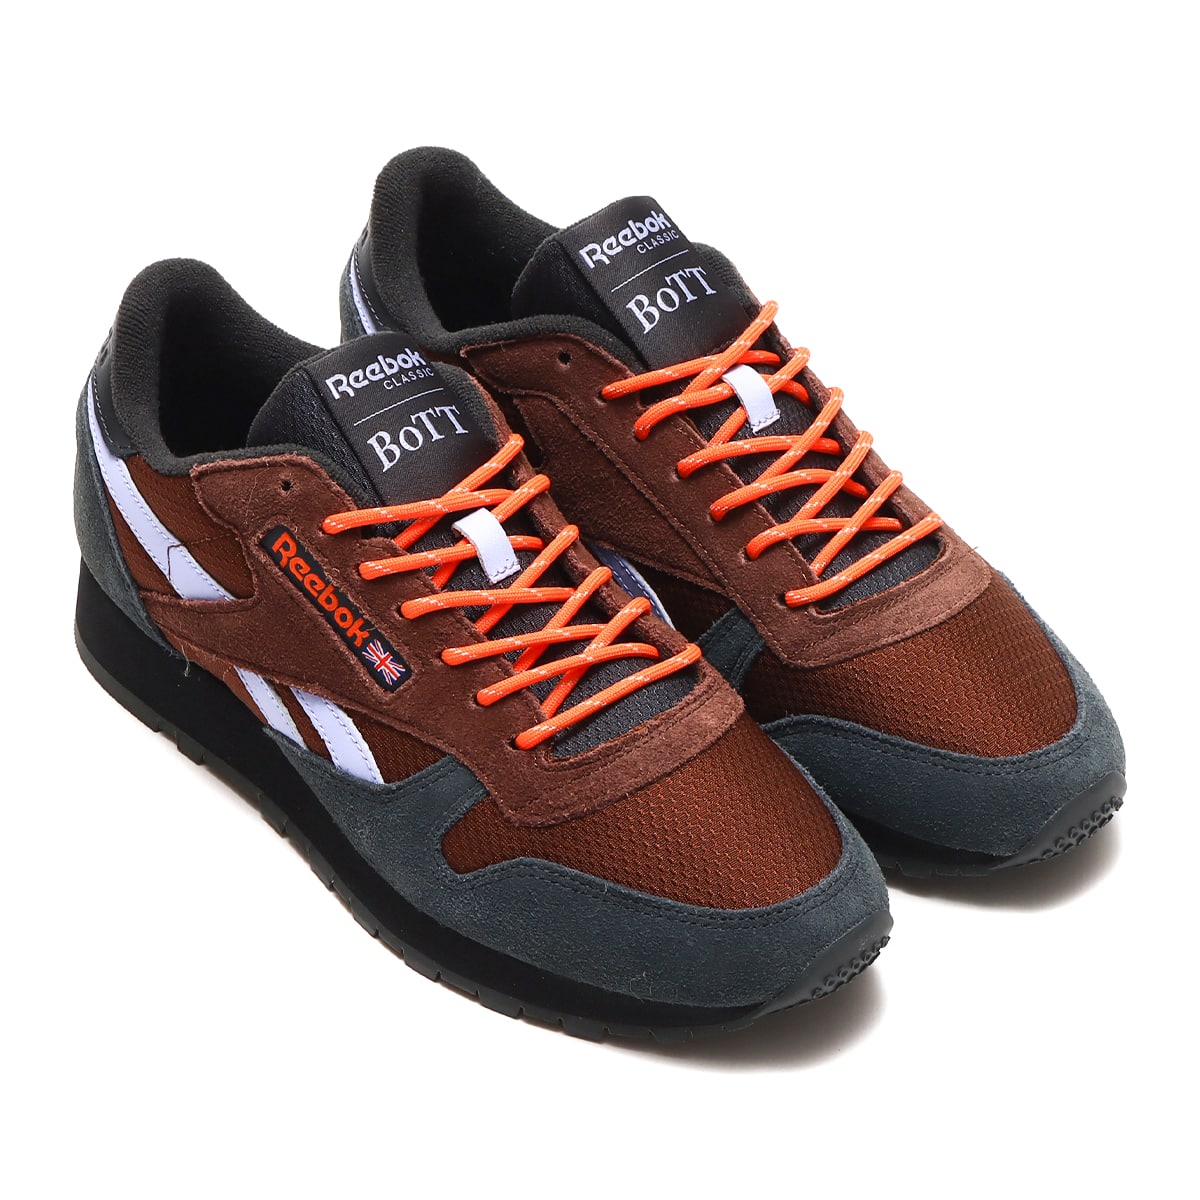 Reebok CLASSIC LEATHER BOTT BRUSH BROWN/PURE GRAY/BRIGHT RUBBER 22FW-S_photo_large